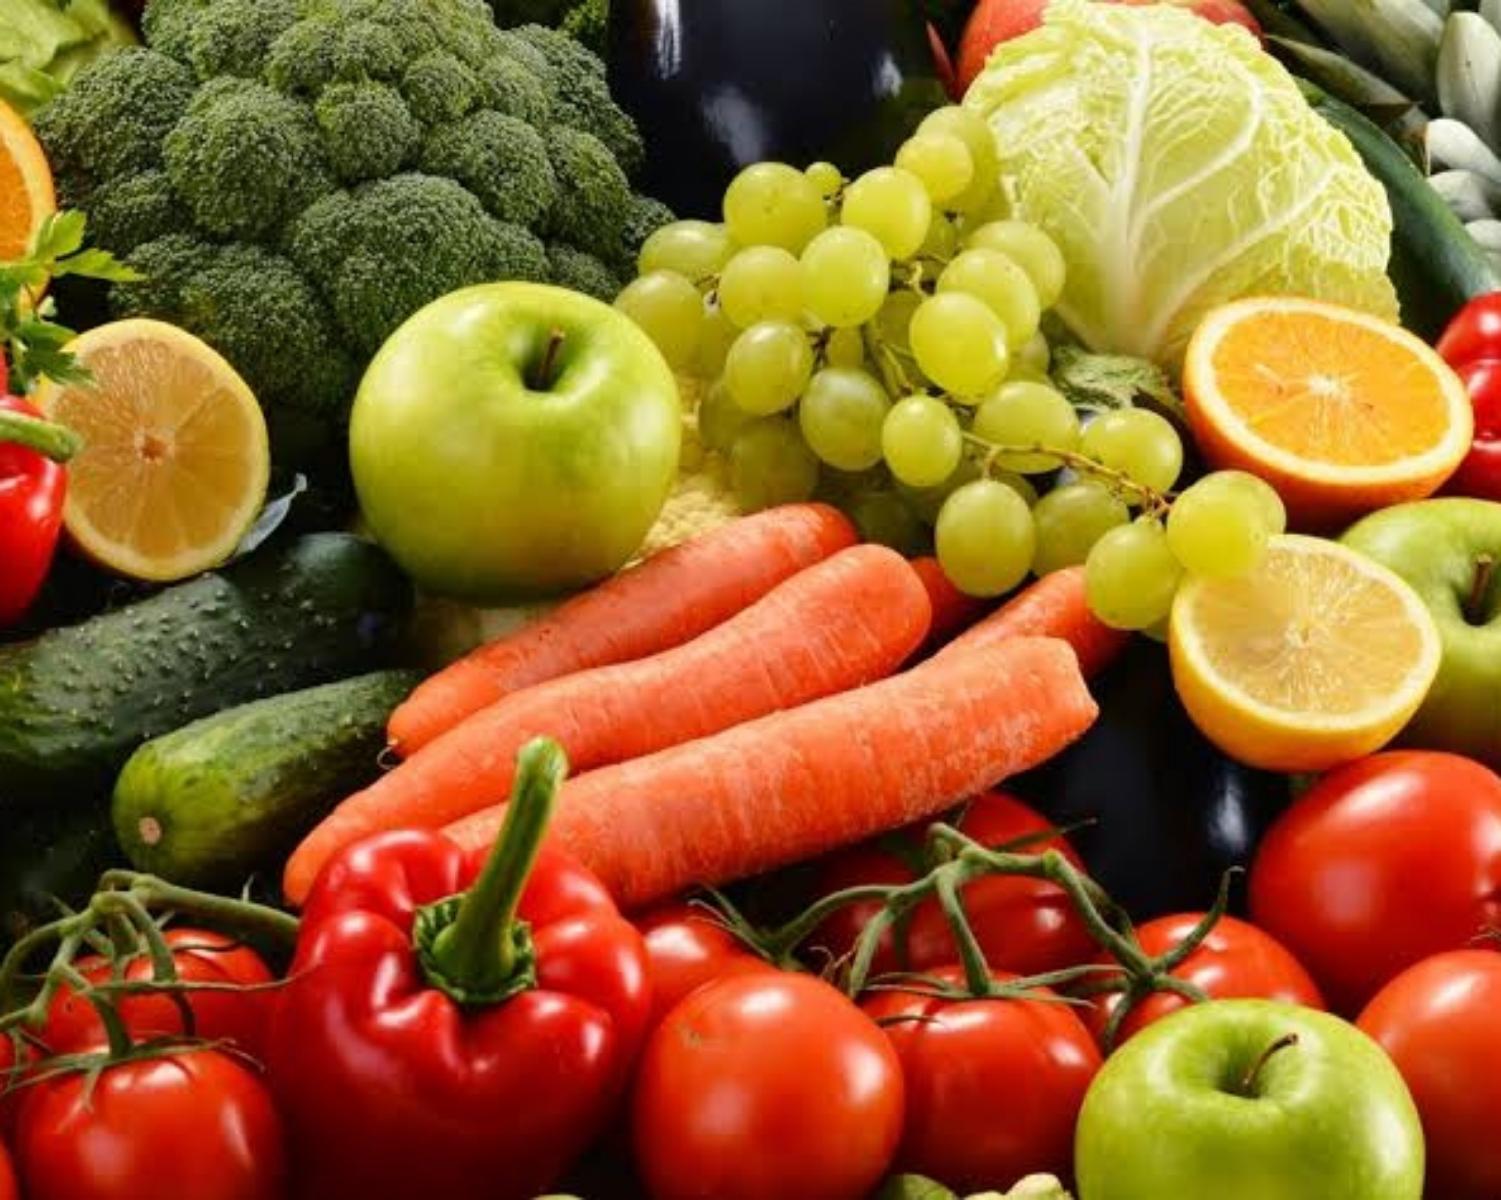 2.Eat Fruits And Vegetables